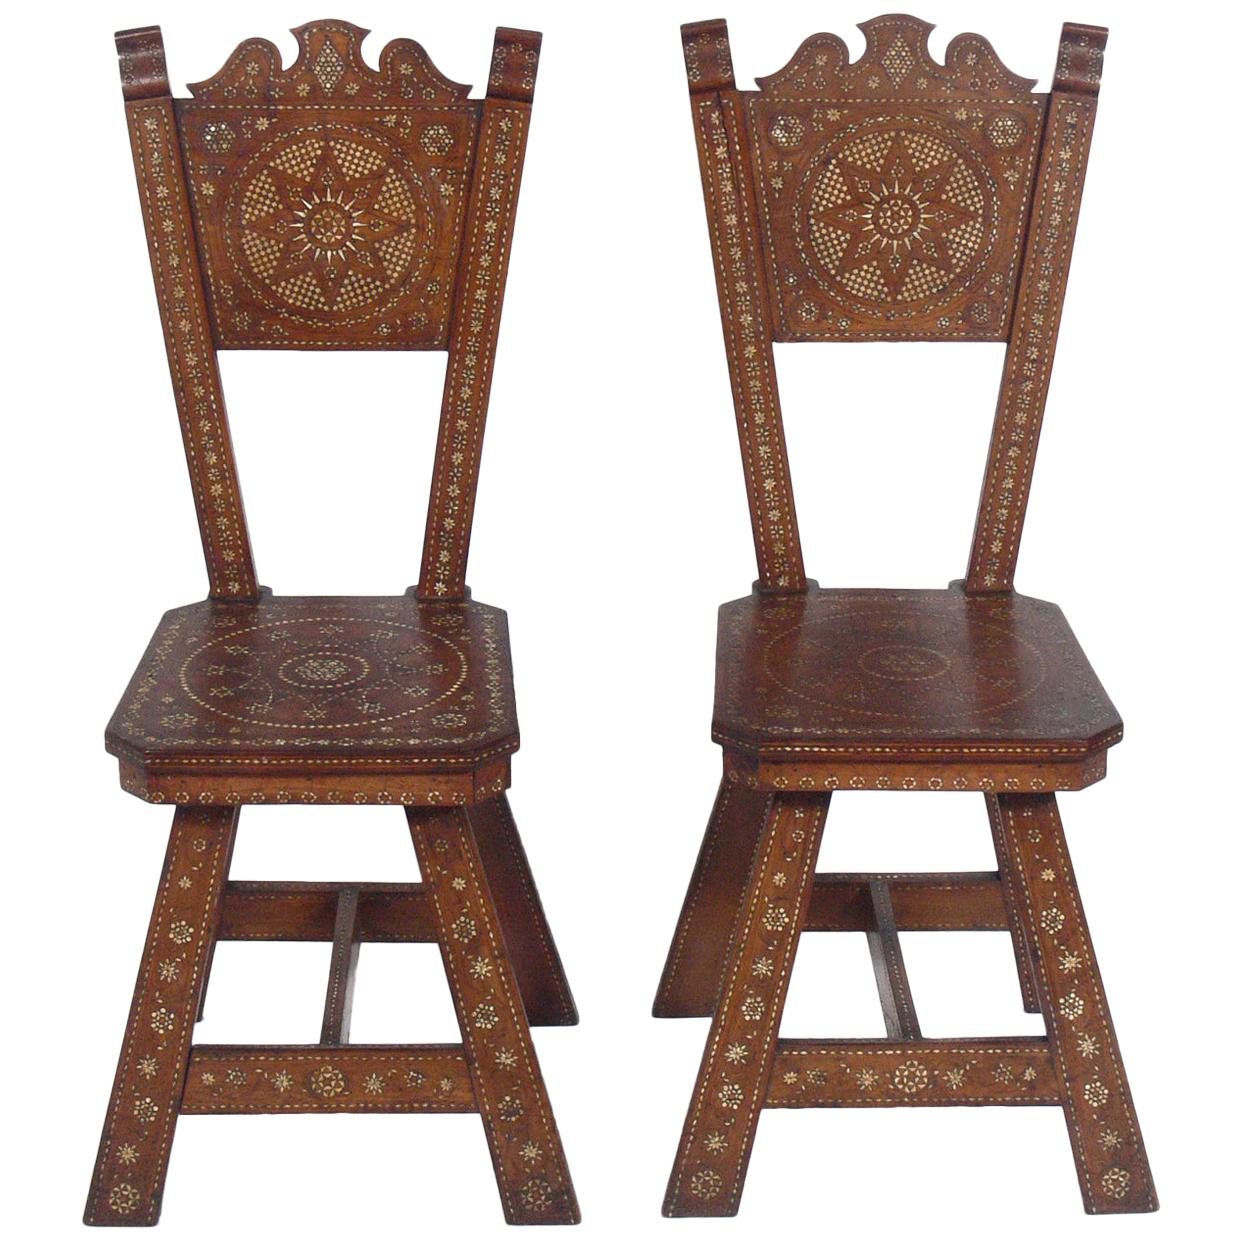 Pair of Inlaid Moroccan Chairs